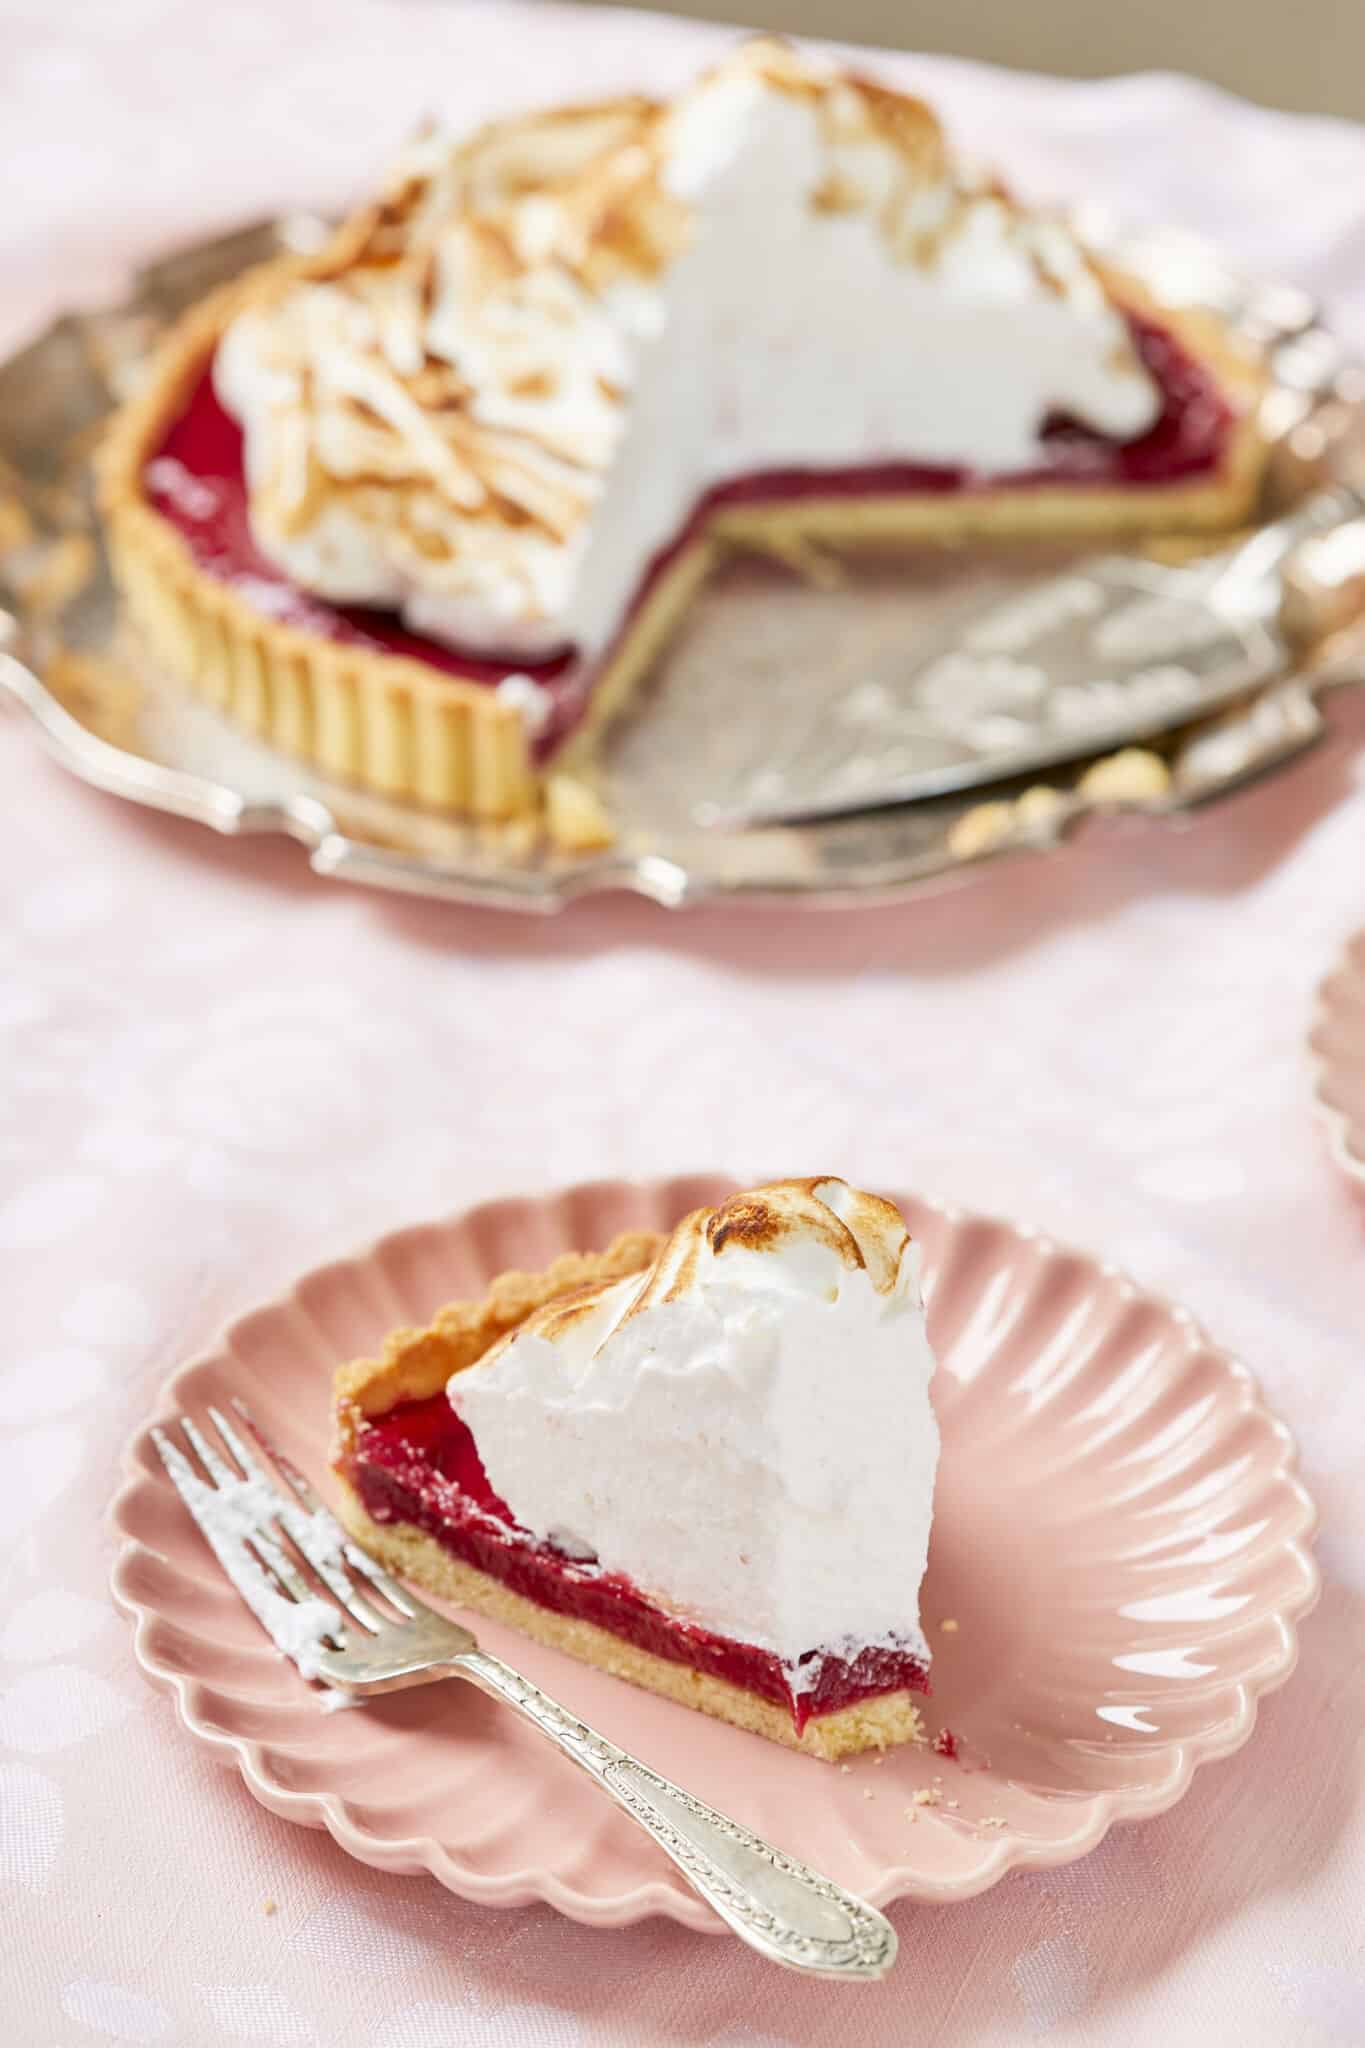 A slice of the pie is served on a small dessert plate next to the main pie. One bite is taken from the small slice, showing the buttery crust, vibrant read tangy raspberry curd topped with a generous amount of fluffy, golden and crispy meringue. 